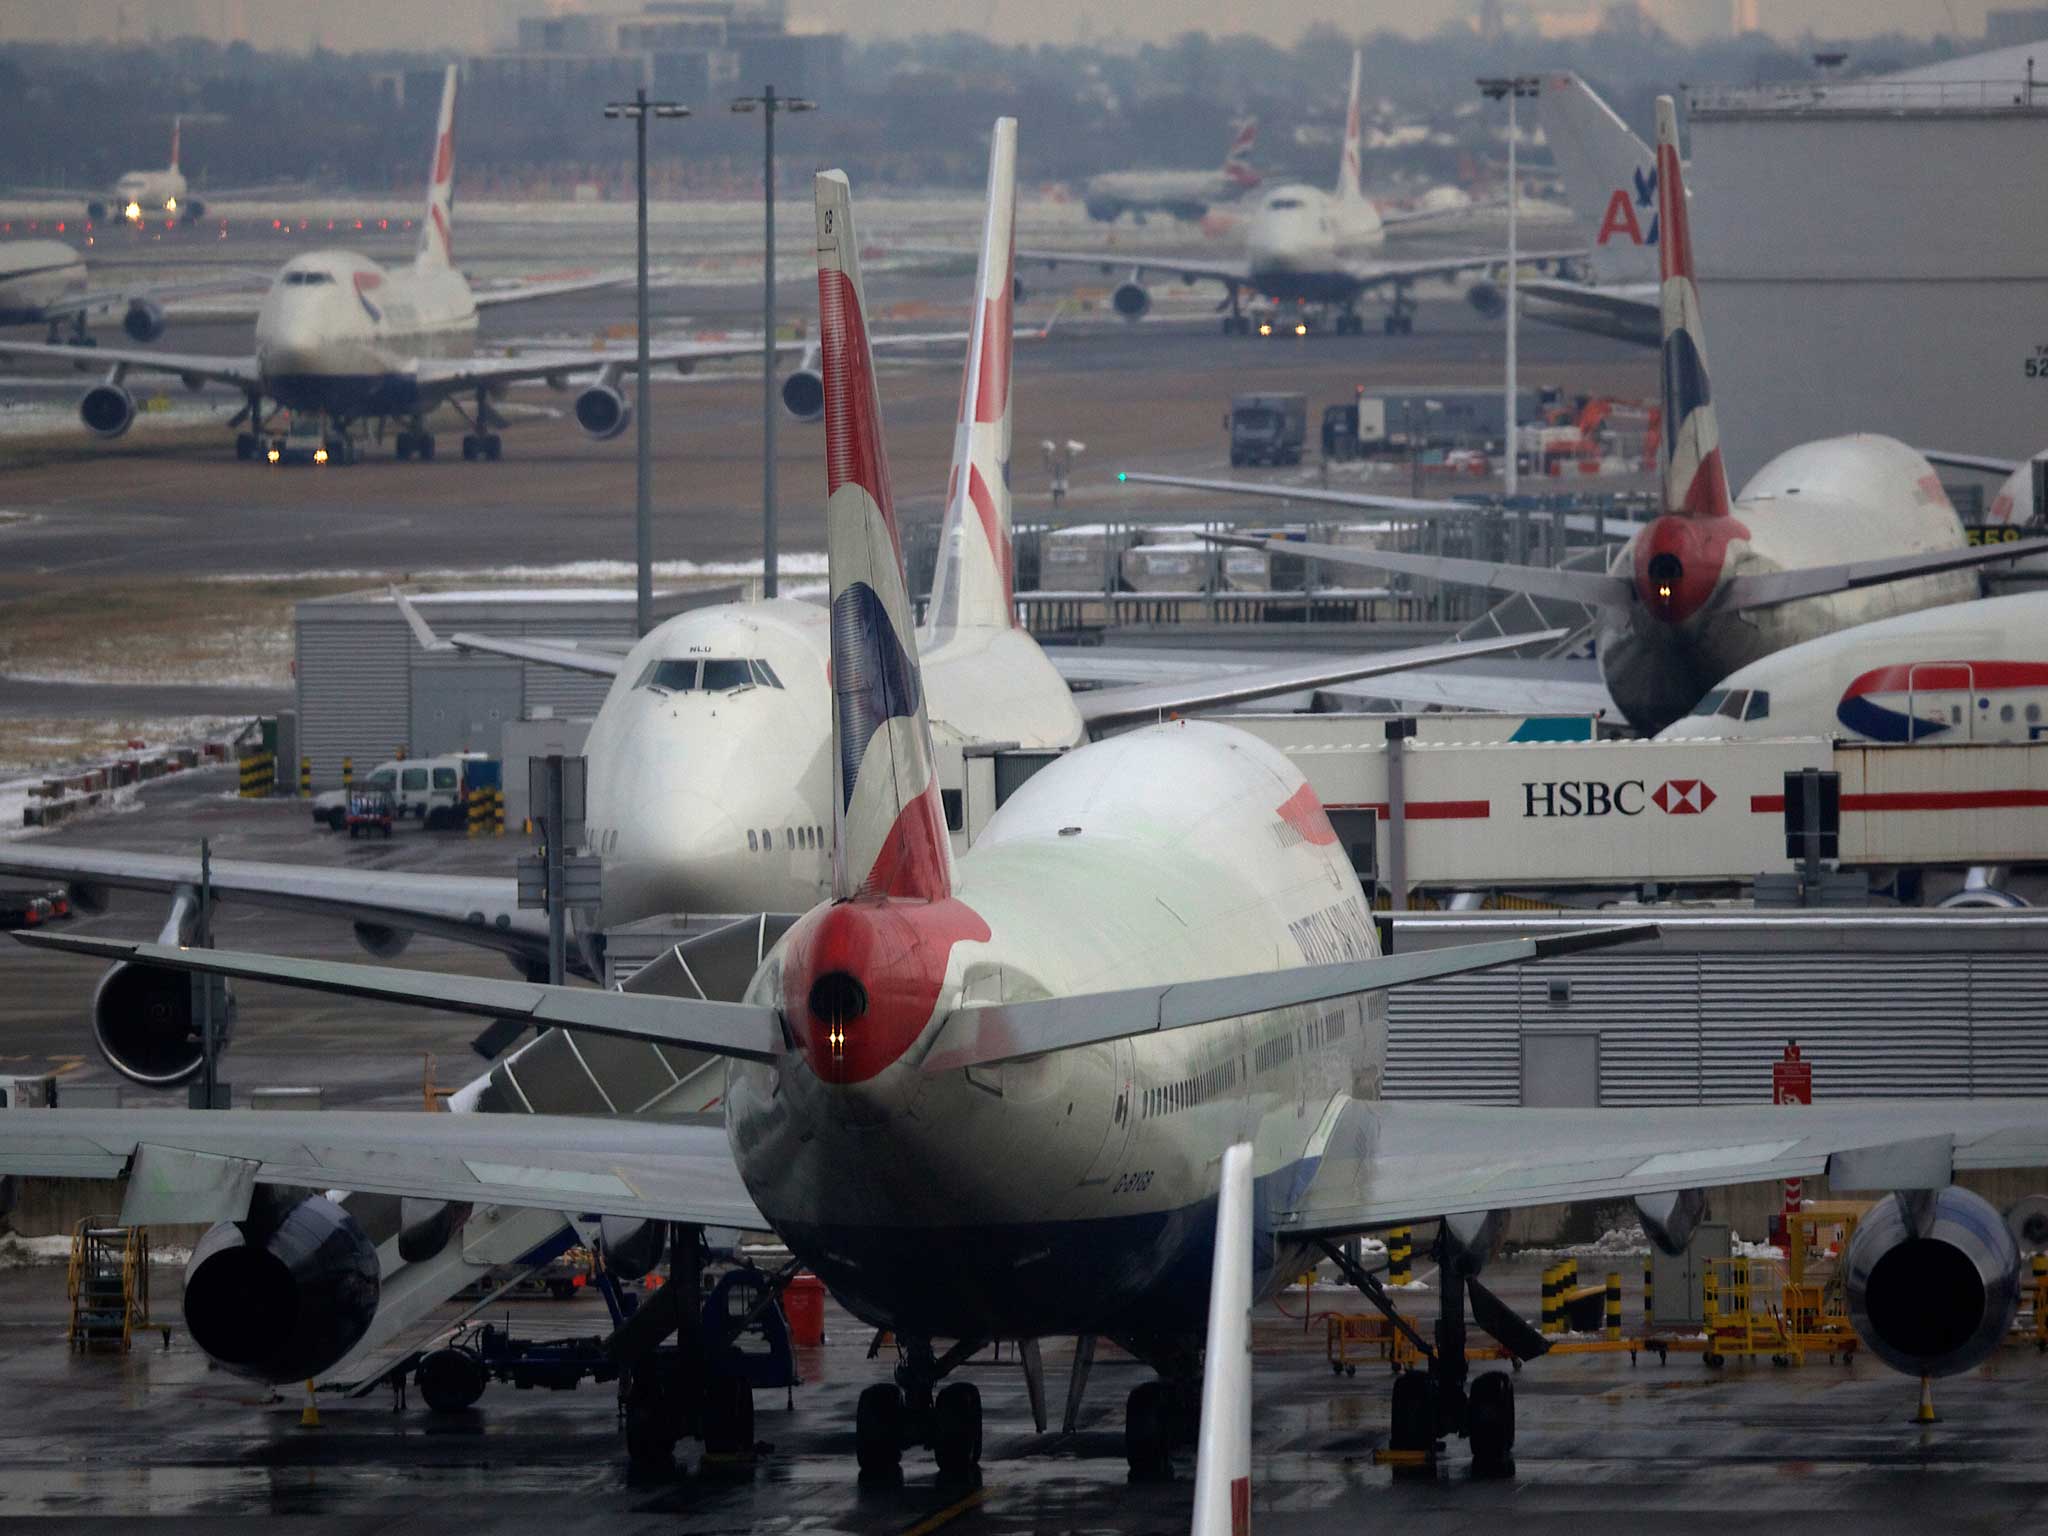 National Air Traffic Services says the issue - which is largely affected flights in the south of the UK - stemmed from its control centre in Swanwick, Hampshire